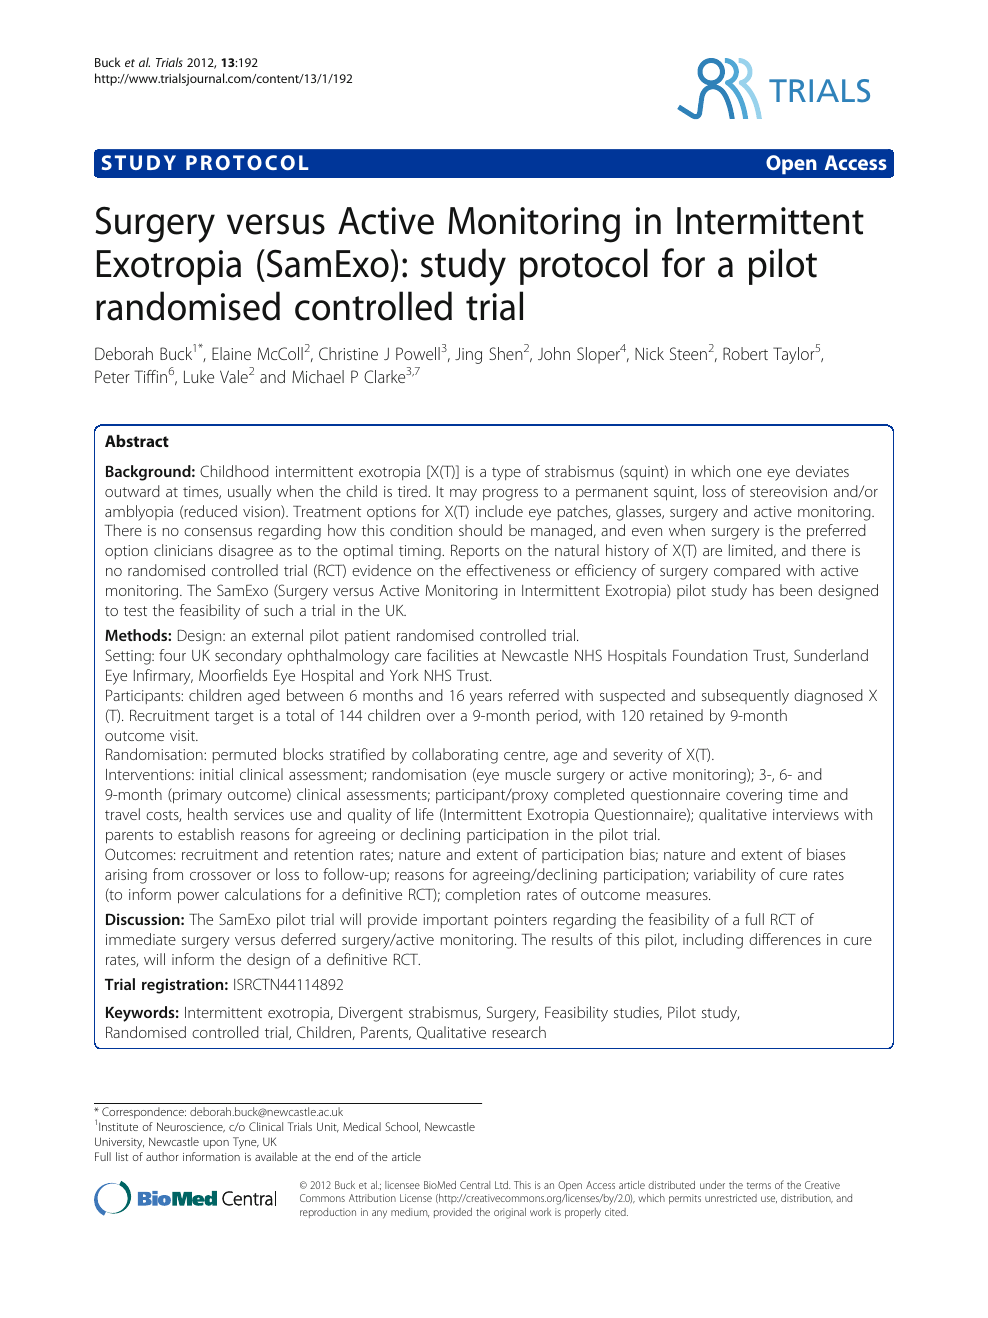 Surgery Versus Active Monitoring In Intermittent Exotropia Samexo Study Protocol For A Pilot Randomised Controlled Trial Topic Of Research Paper In Clinical Medicine Download Scholarly Article Pdf And Read For Free